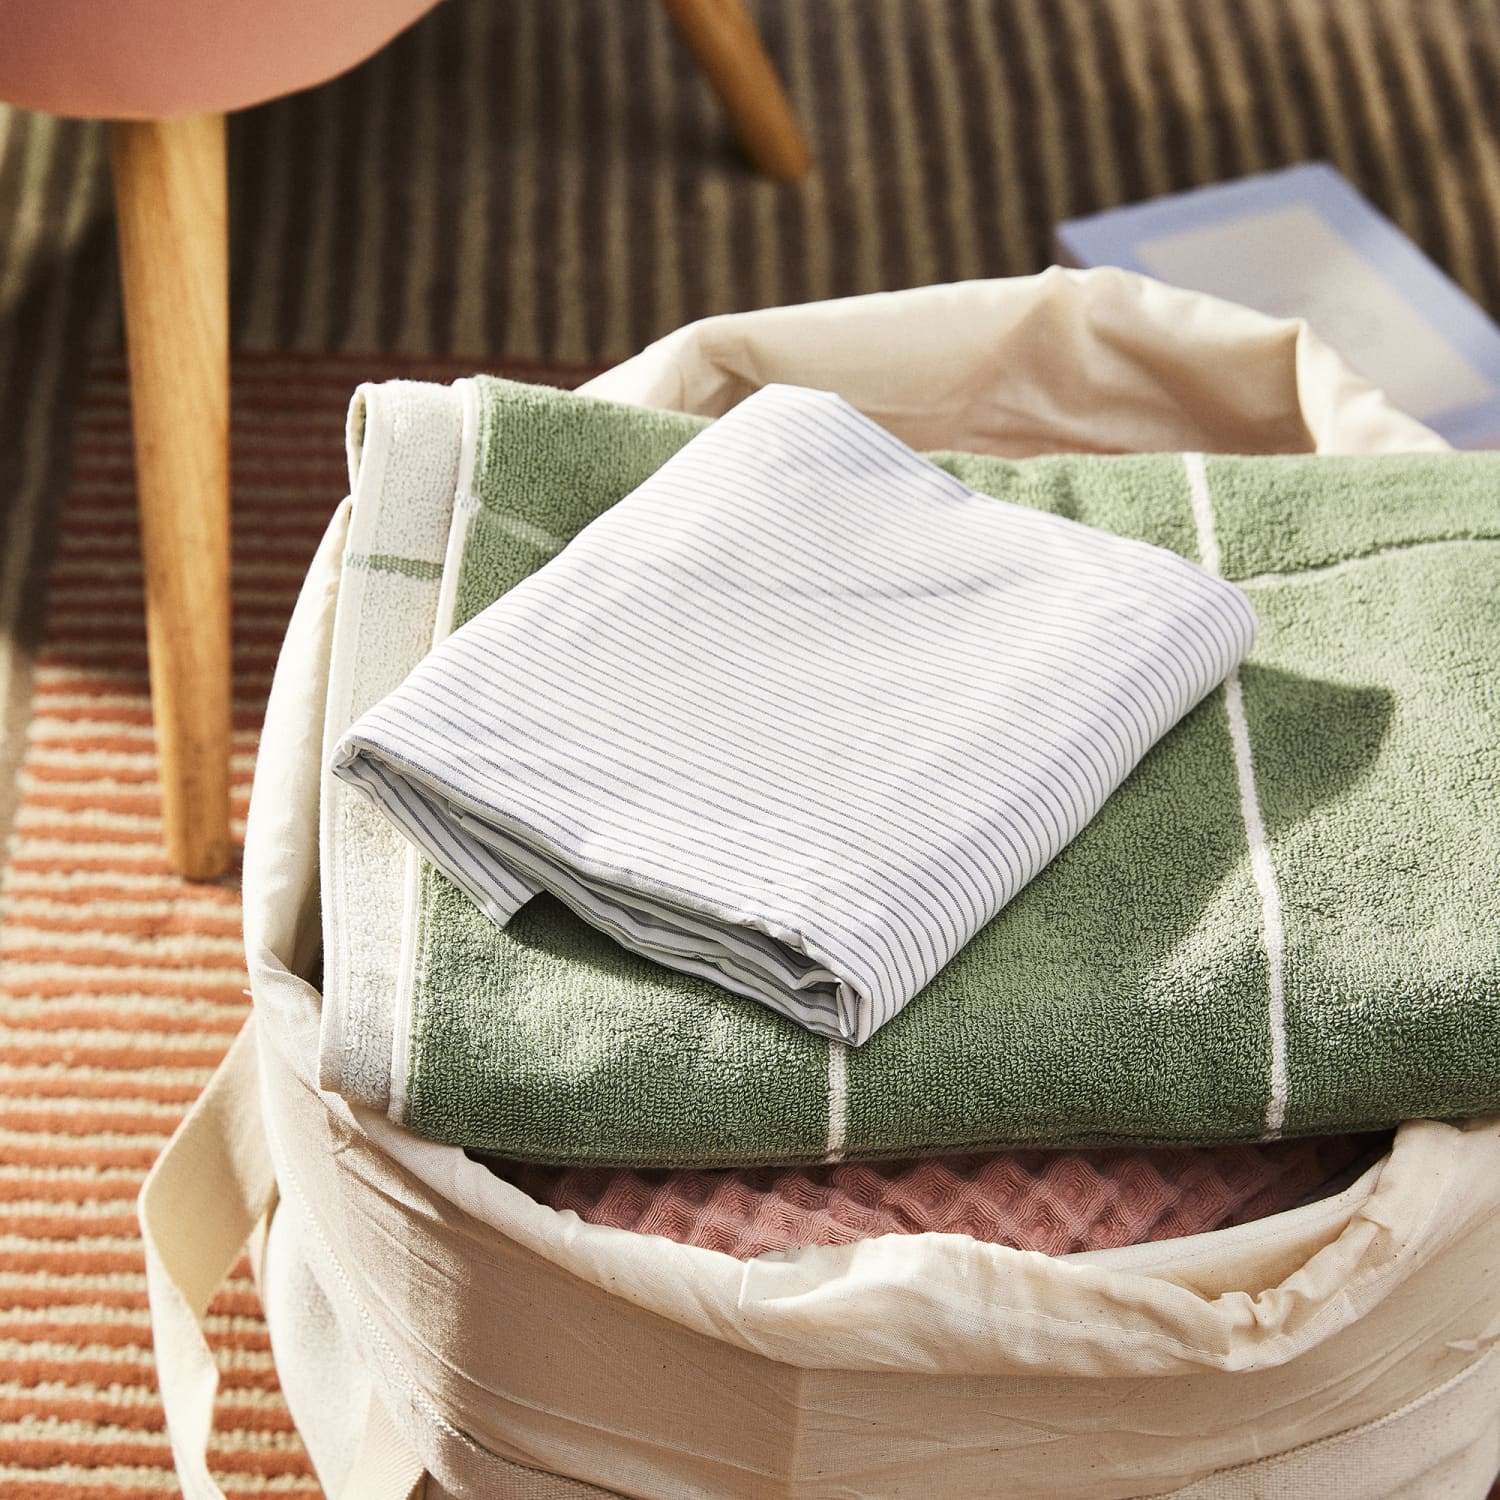 Save Time & Money with Pre-Washed Sheets & Towels